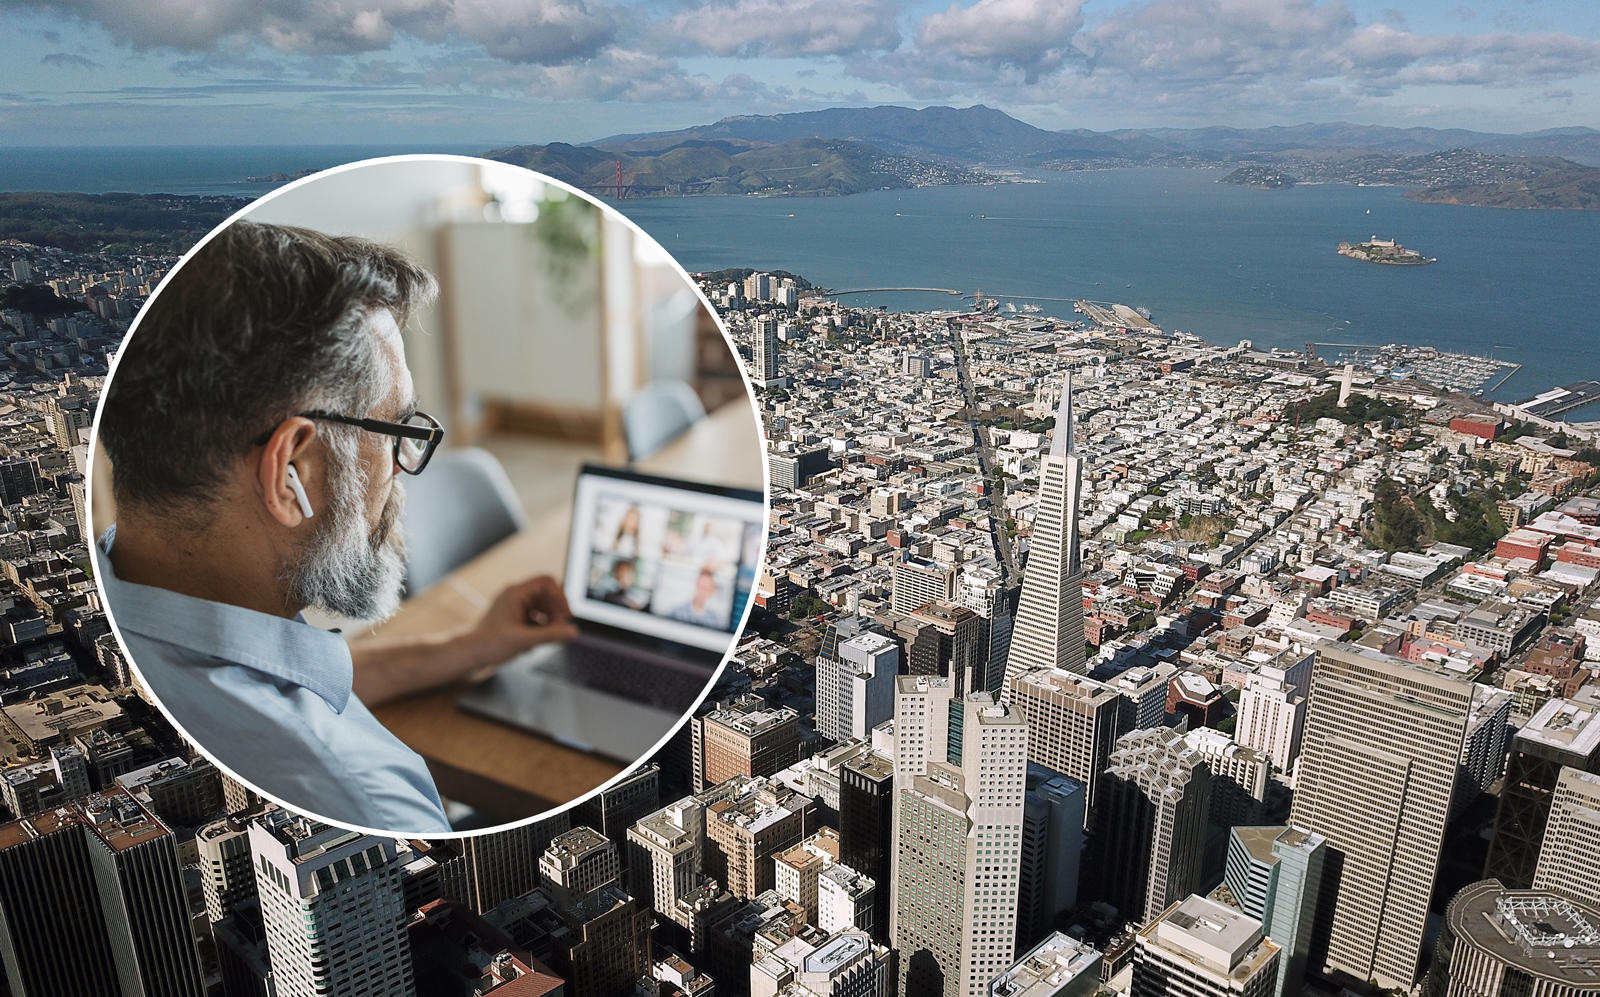 Companies across the U.S. are warming up to the idea of remote working. Some employees who live in expensive regions like the San Francisco Bay Area, figure they might as well move someplace cheaper. (Credit: iStock)